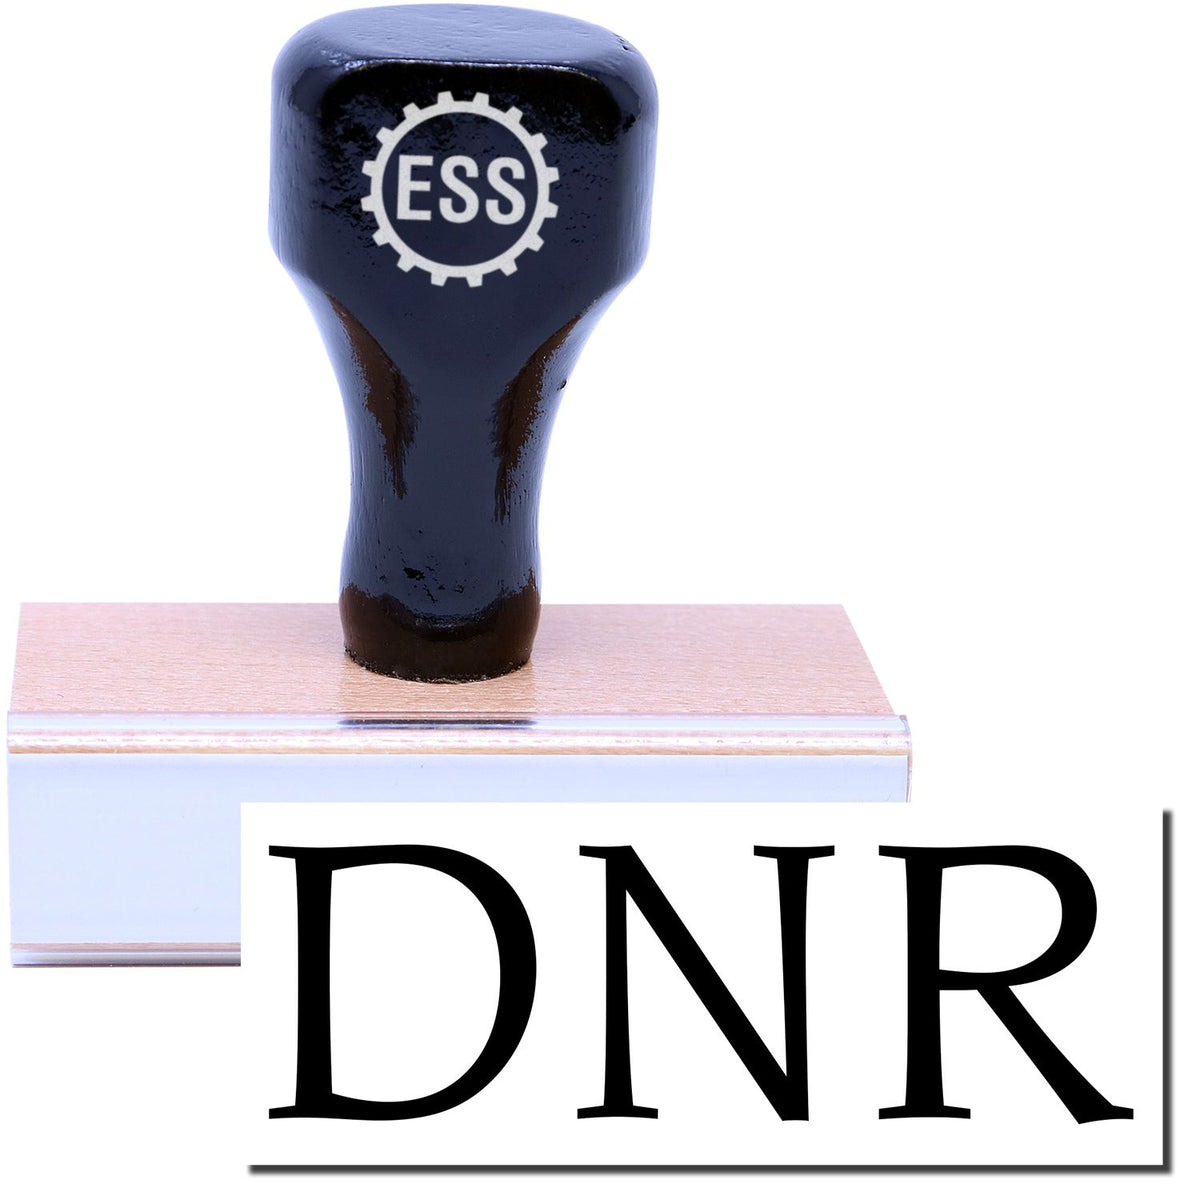 A stock office rubber stamp with a stamped image showing how the text &quot;DNR&quot; in a large font is displayed after stamping.